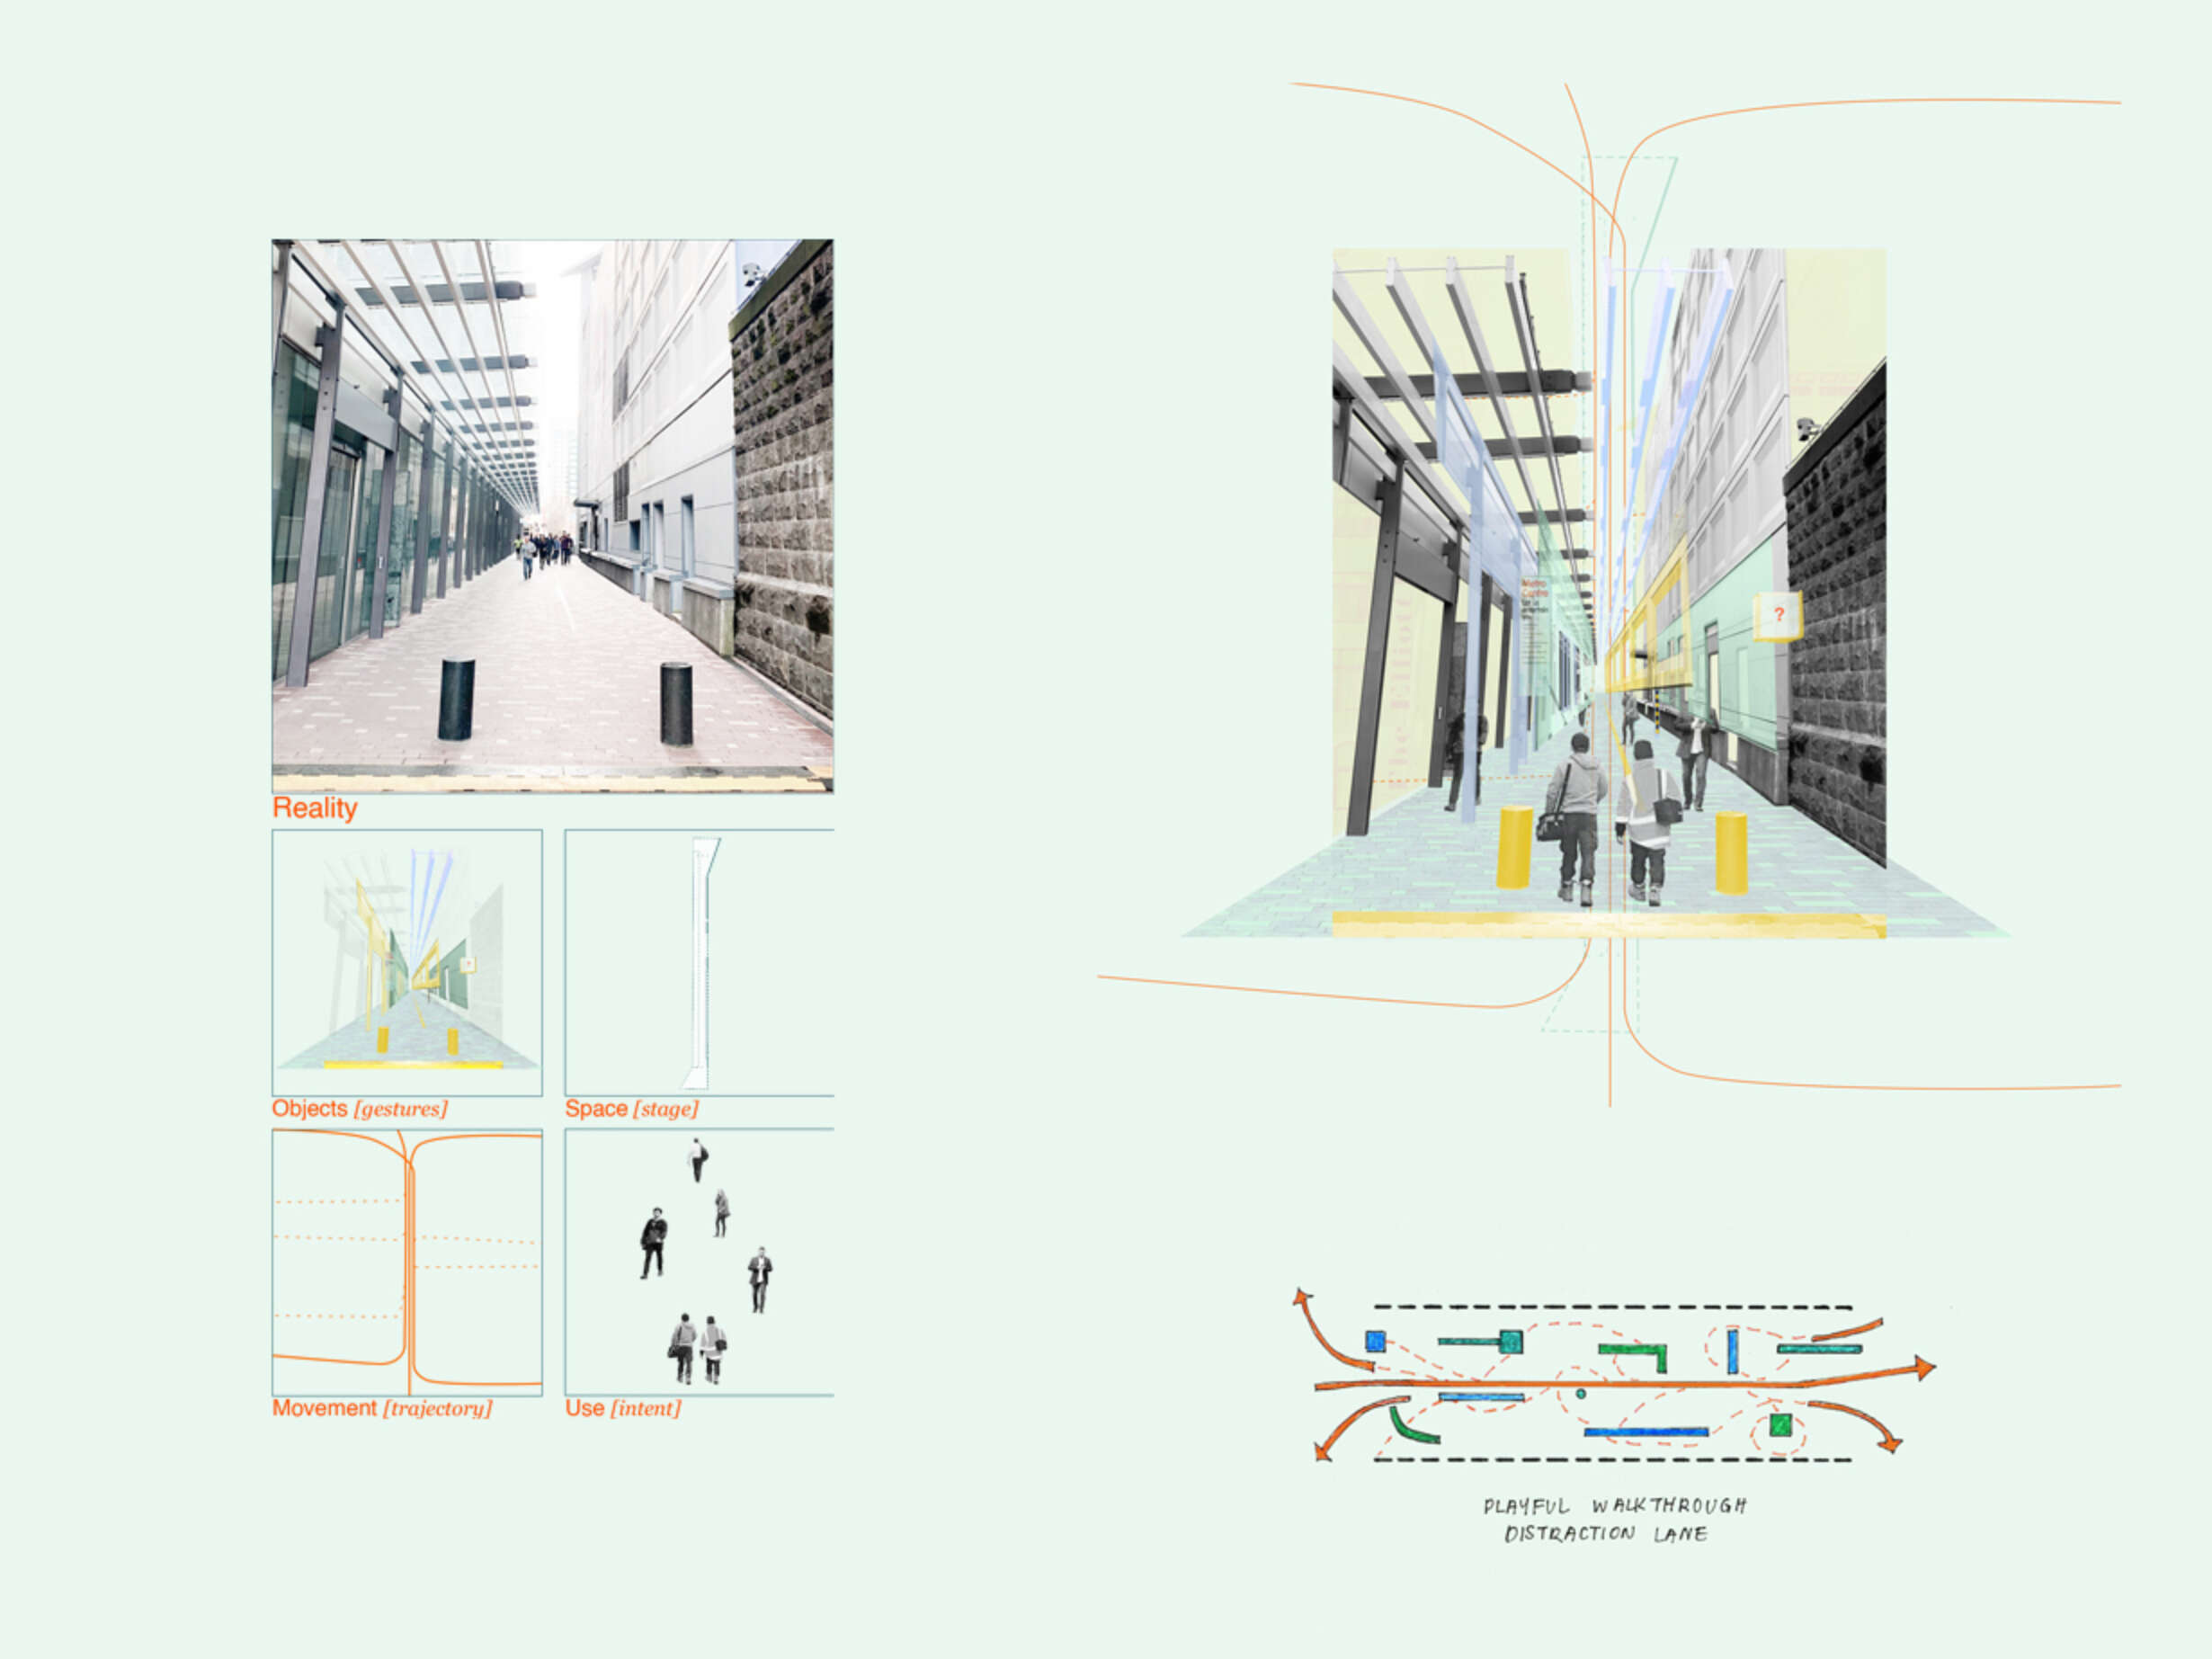 Distraction Lane concept (Bledisloe Lane reimagined): extracted elements, collage & diagram